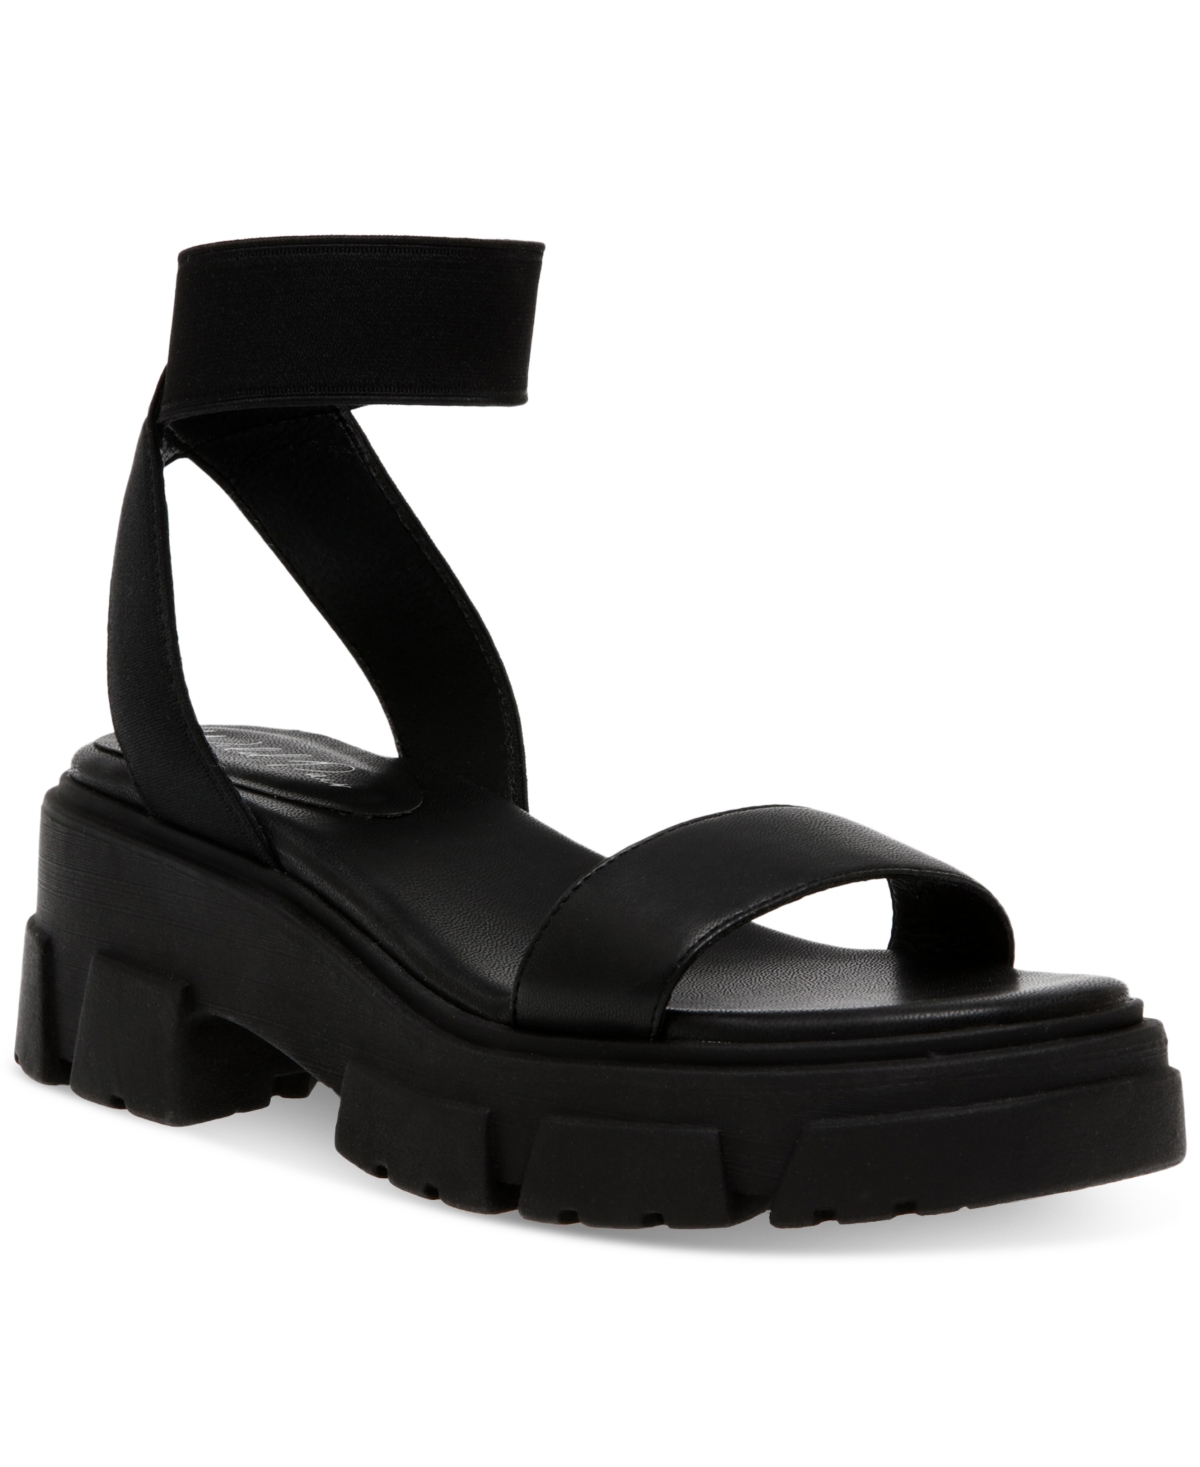 Theodorra Two-Piece Lug Sole Sandals, Created for Macy's - Black